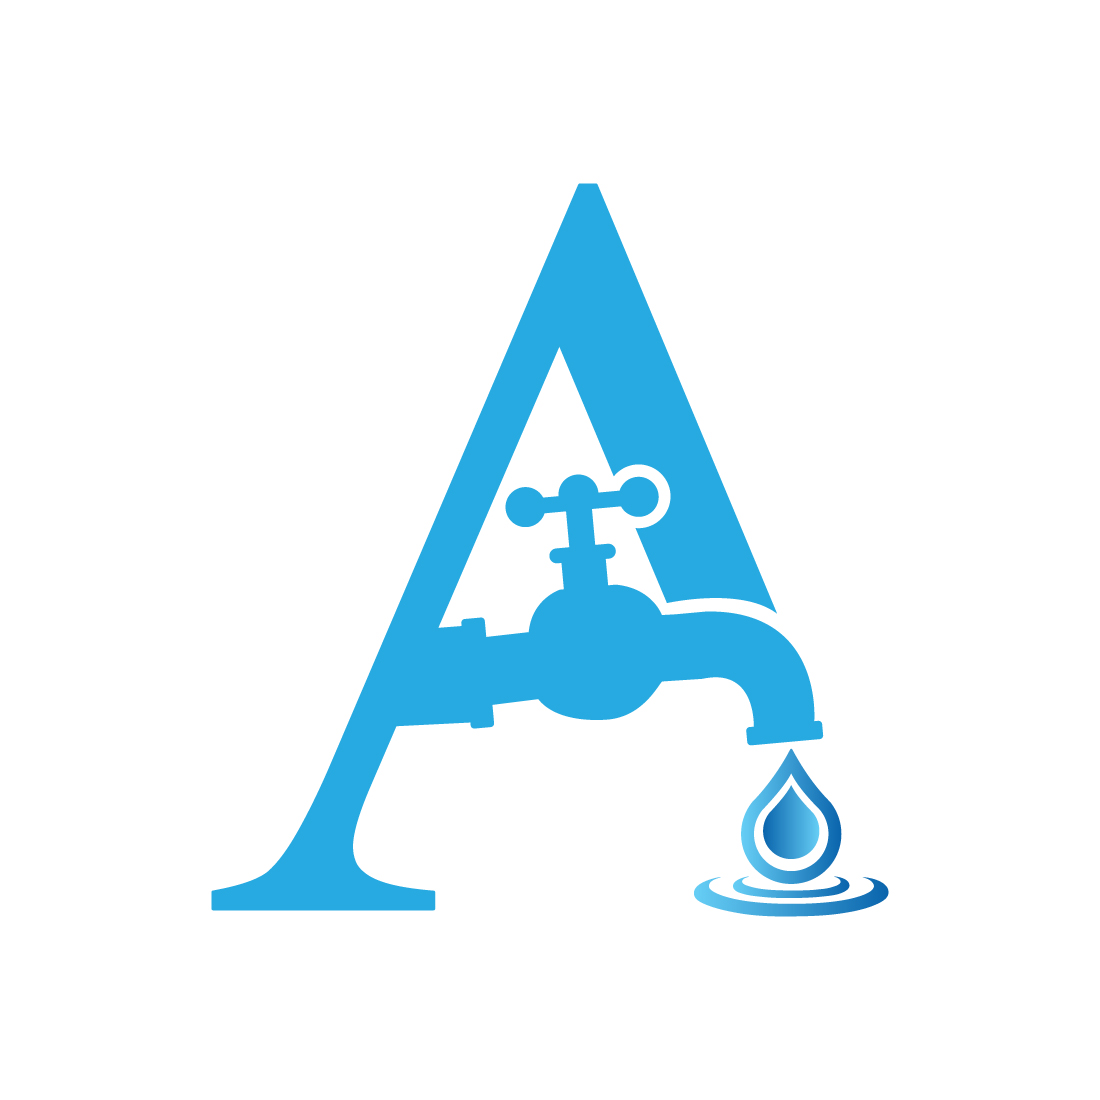 Professional A letters logo design vector images A Water drop logo design A water tap logo best icon template illustration preview image.